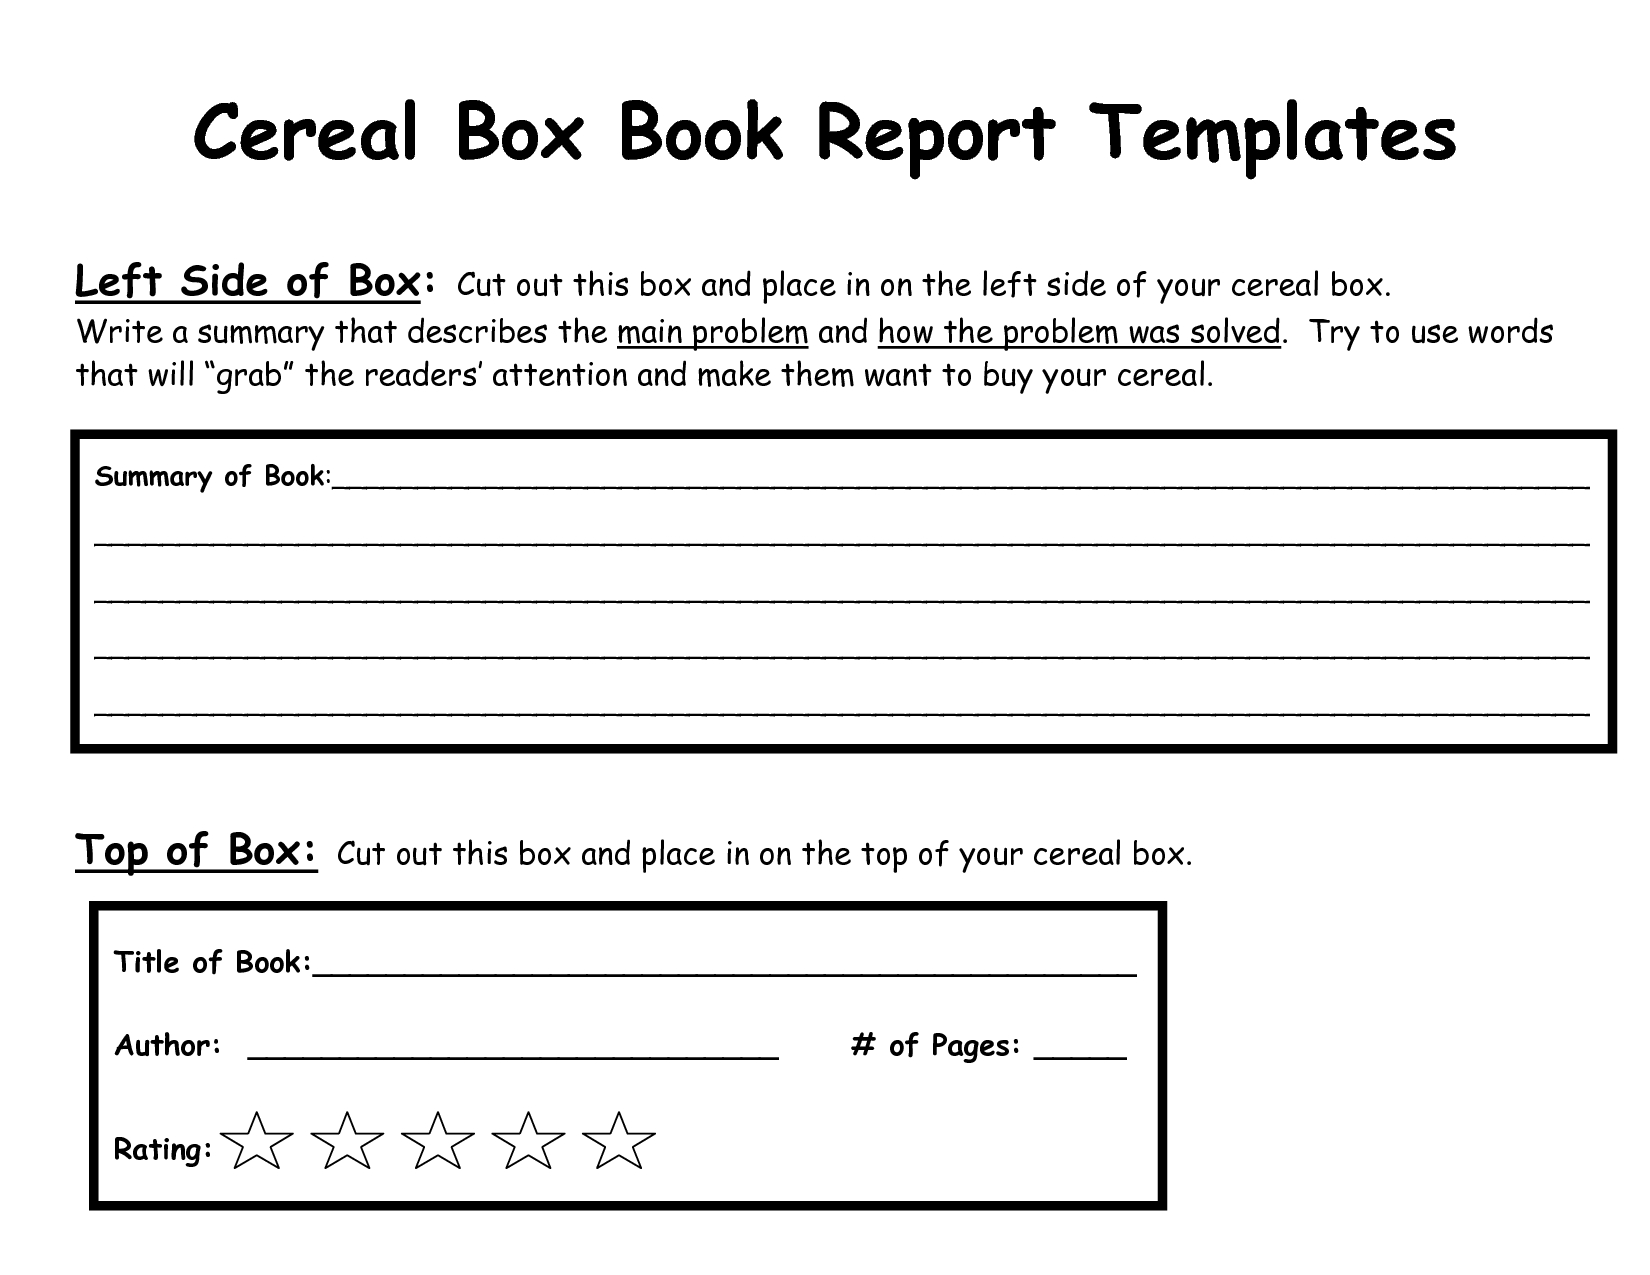 Cerealboxbookreporttemplate  Creative  Book Report Templates with regard to Cereal Box Book Report Template